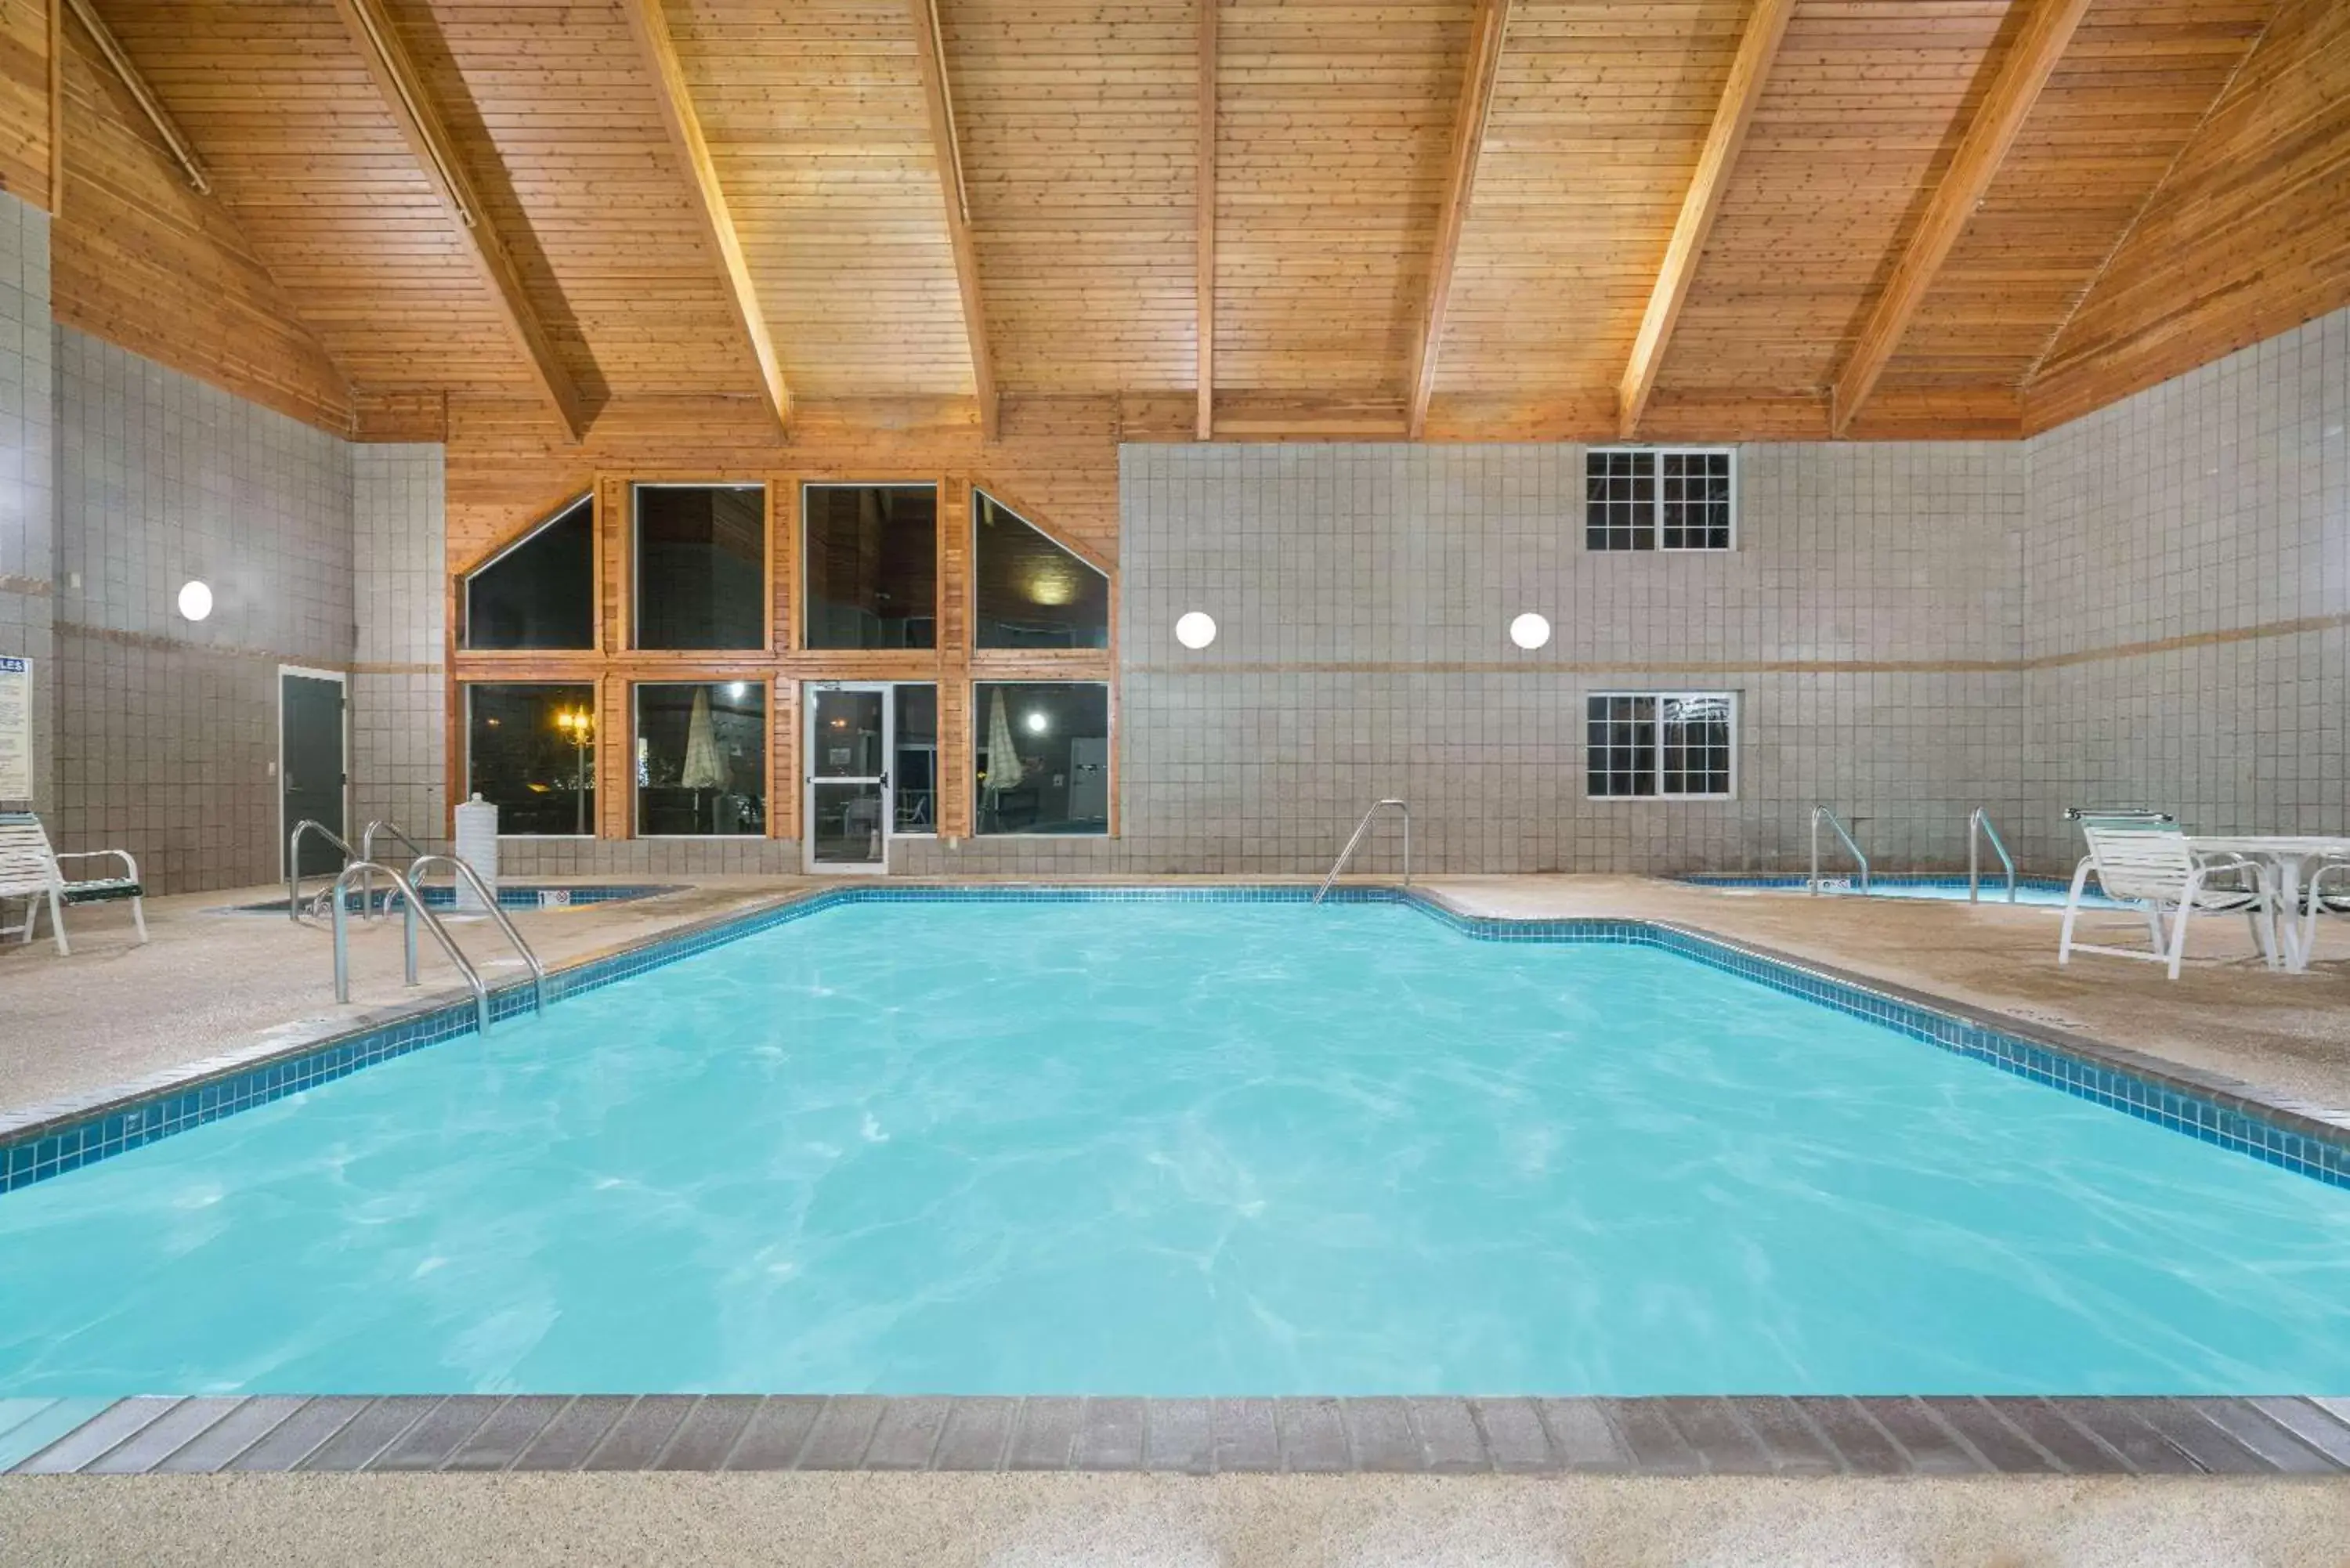 On site, Swimming Pool in Baymont by Wyndham Baxter/Brainerd Area